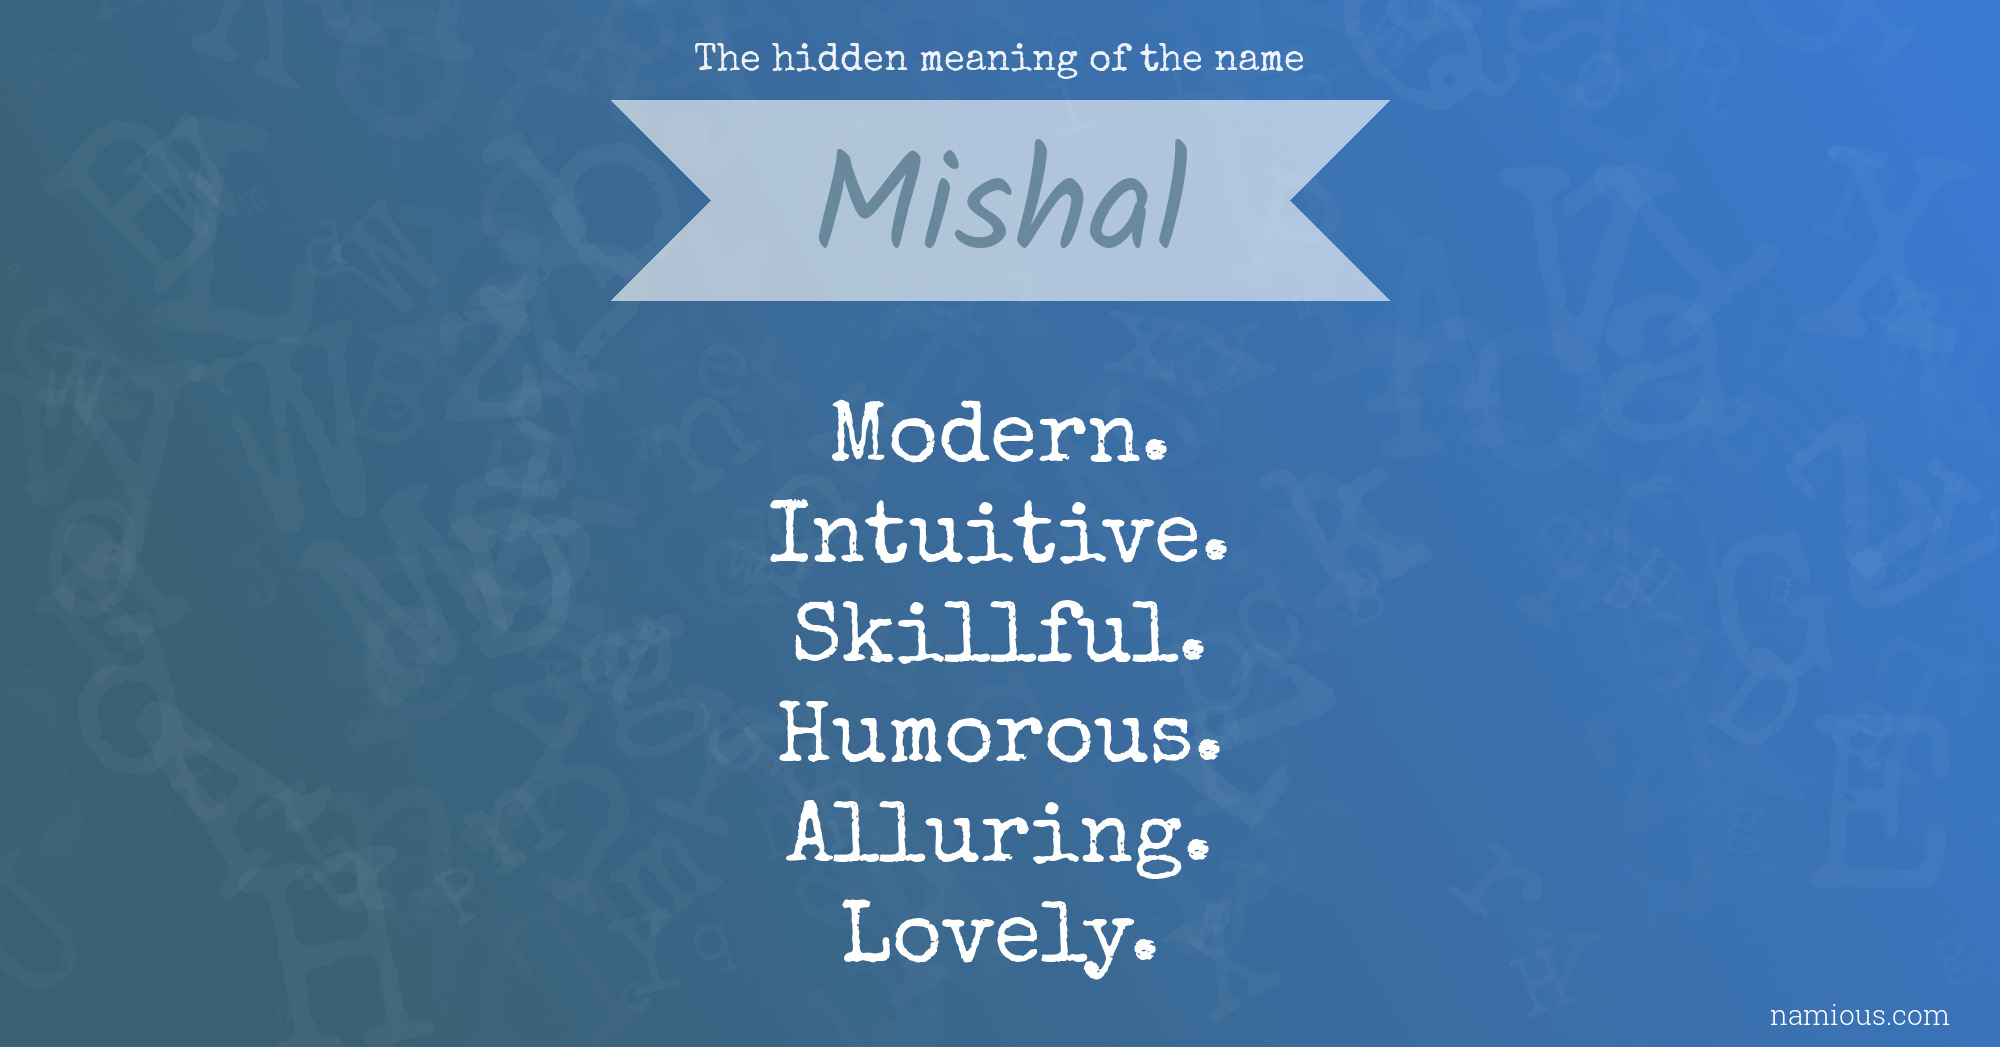 The hidden meaning of the name Mishal